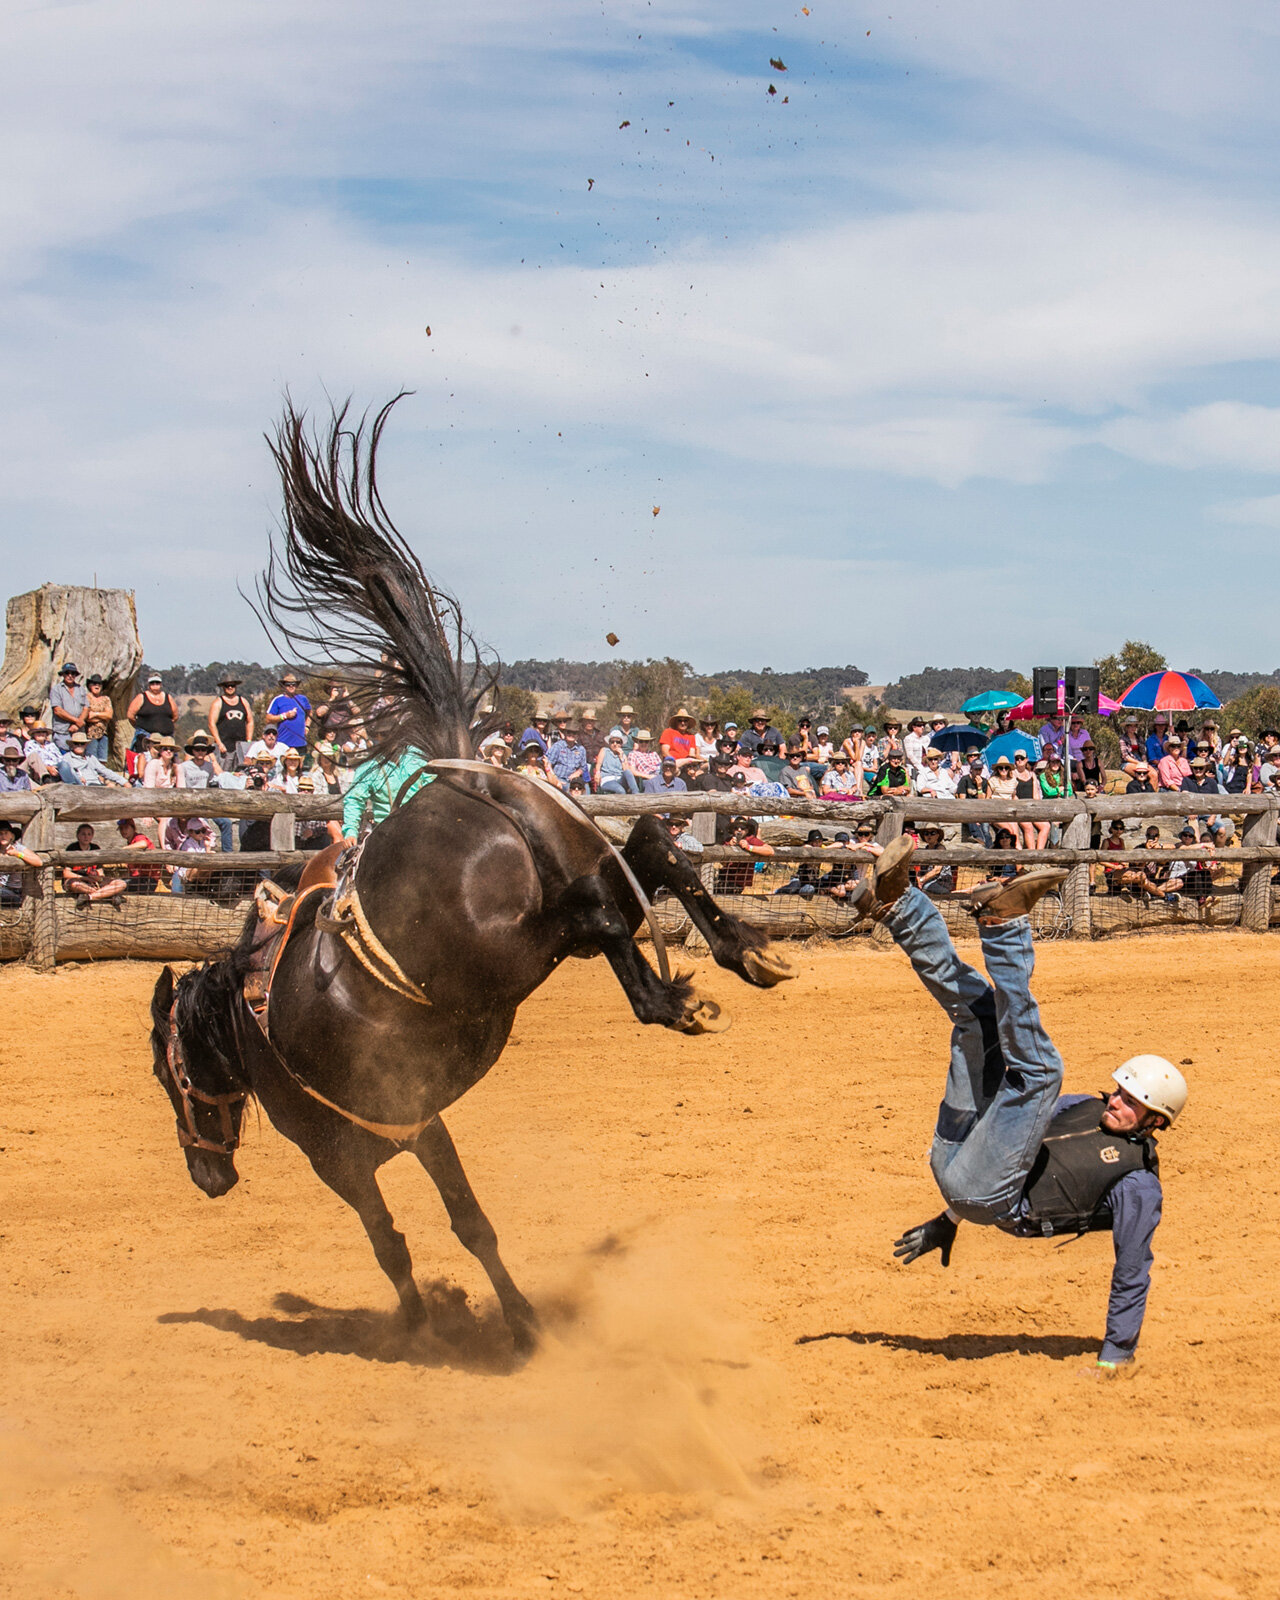 Kicking up their heels at the Boyup Brook Rodeo in Western Australia